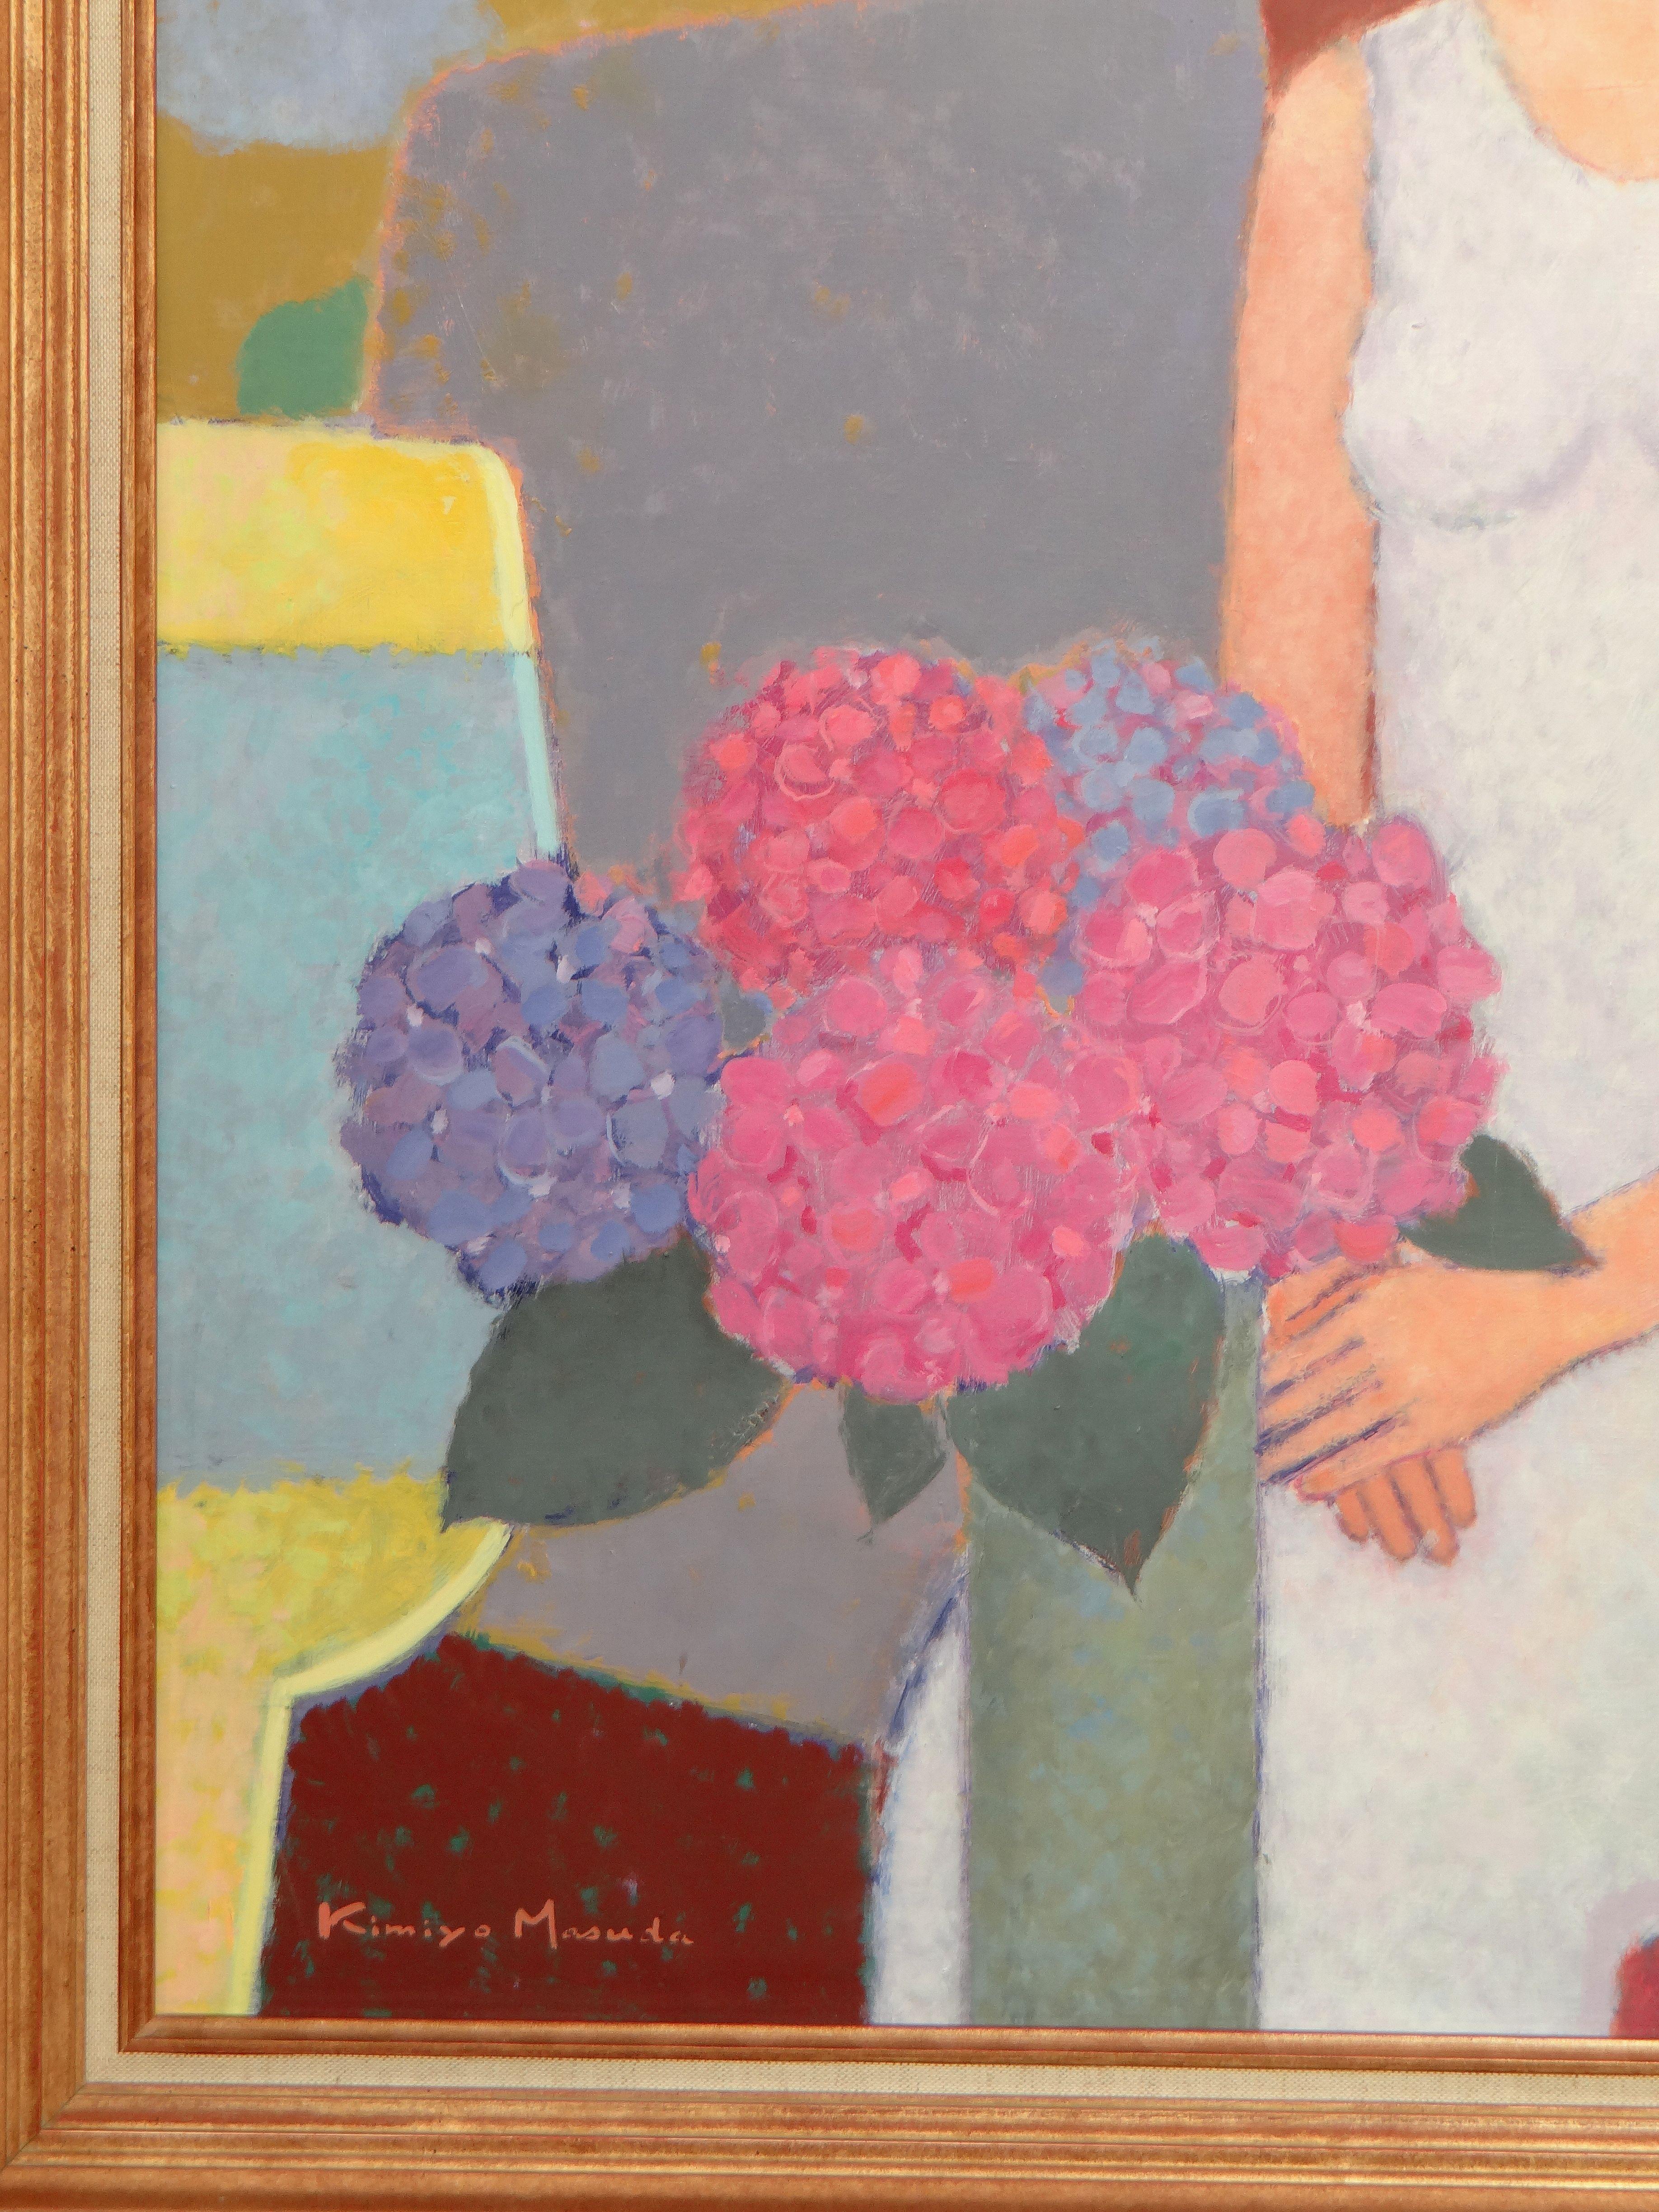 Modern Kimiyo Masuda, Painting Young Women with Bouquet of Flowers, 1988